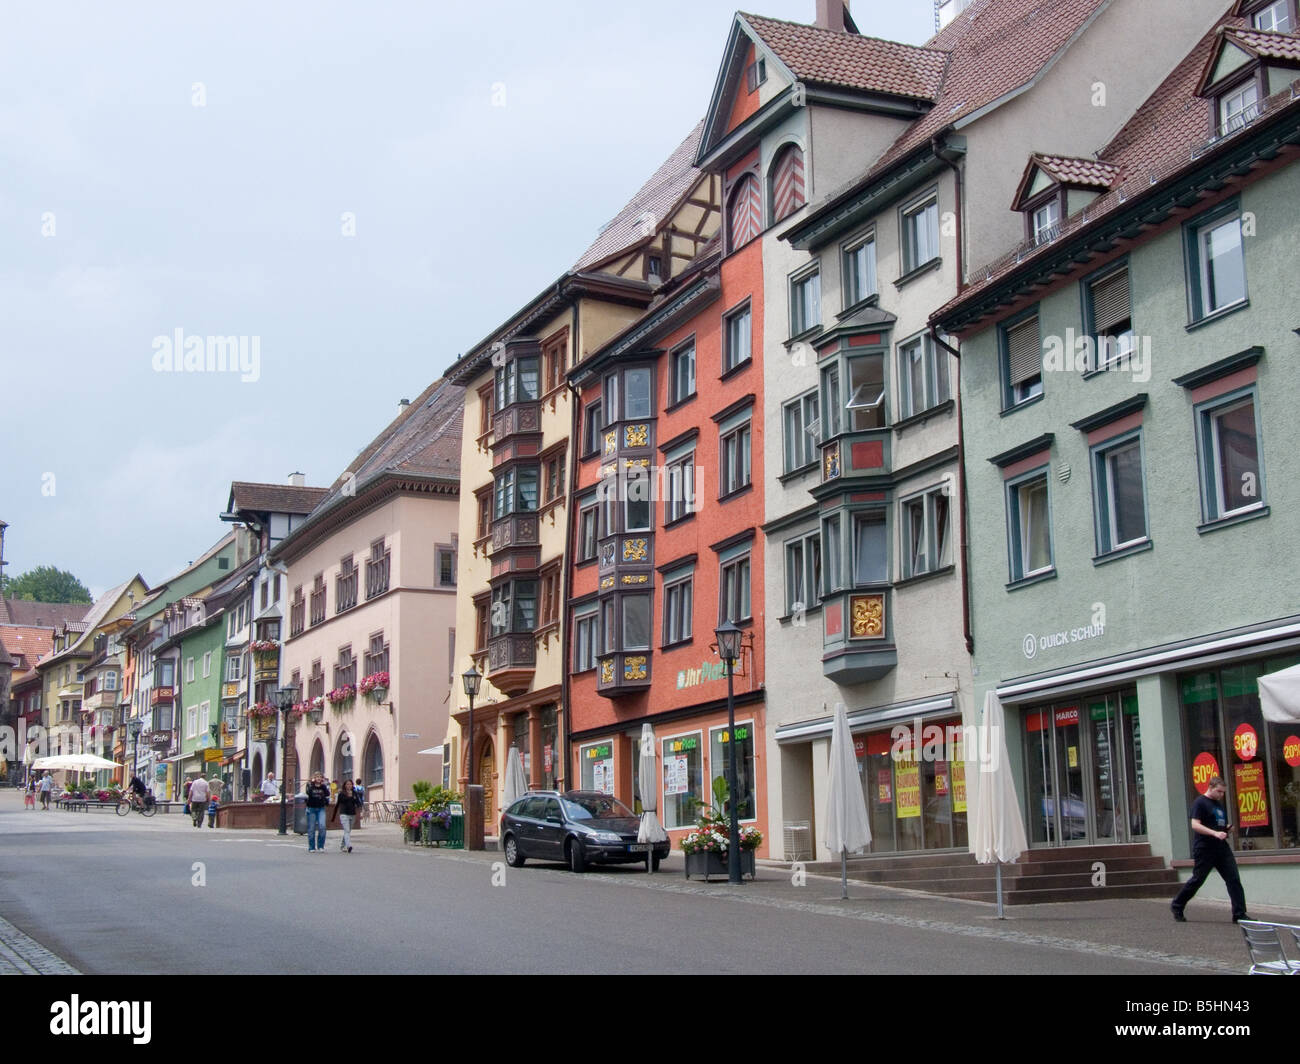 The historic town of Rotweil in Baden Wurttemburg, Germany Stock Photo